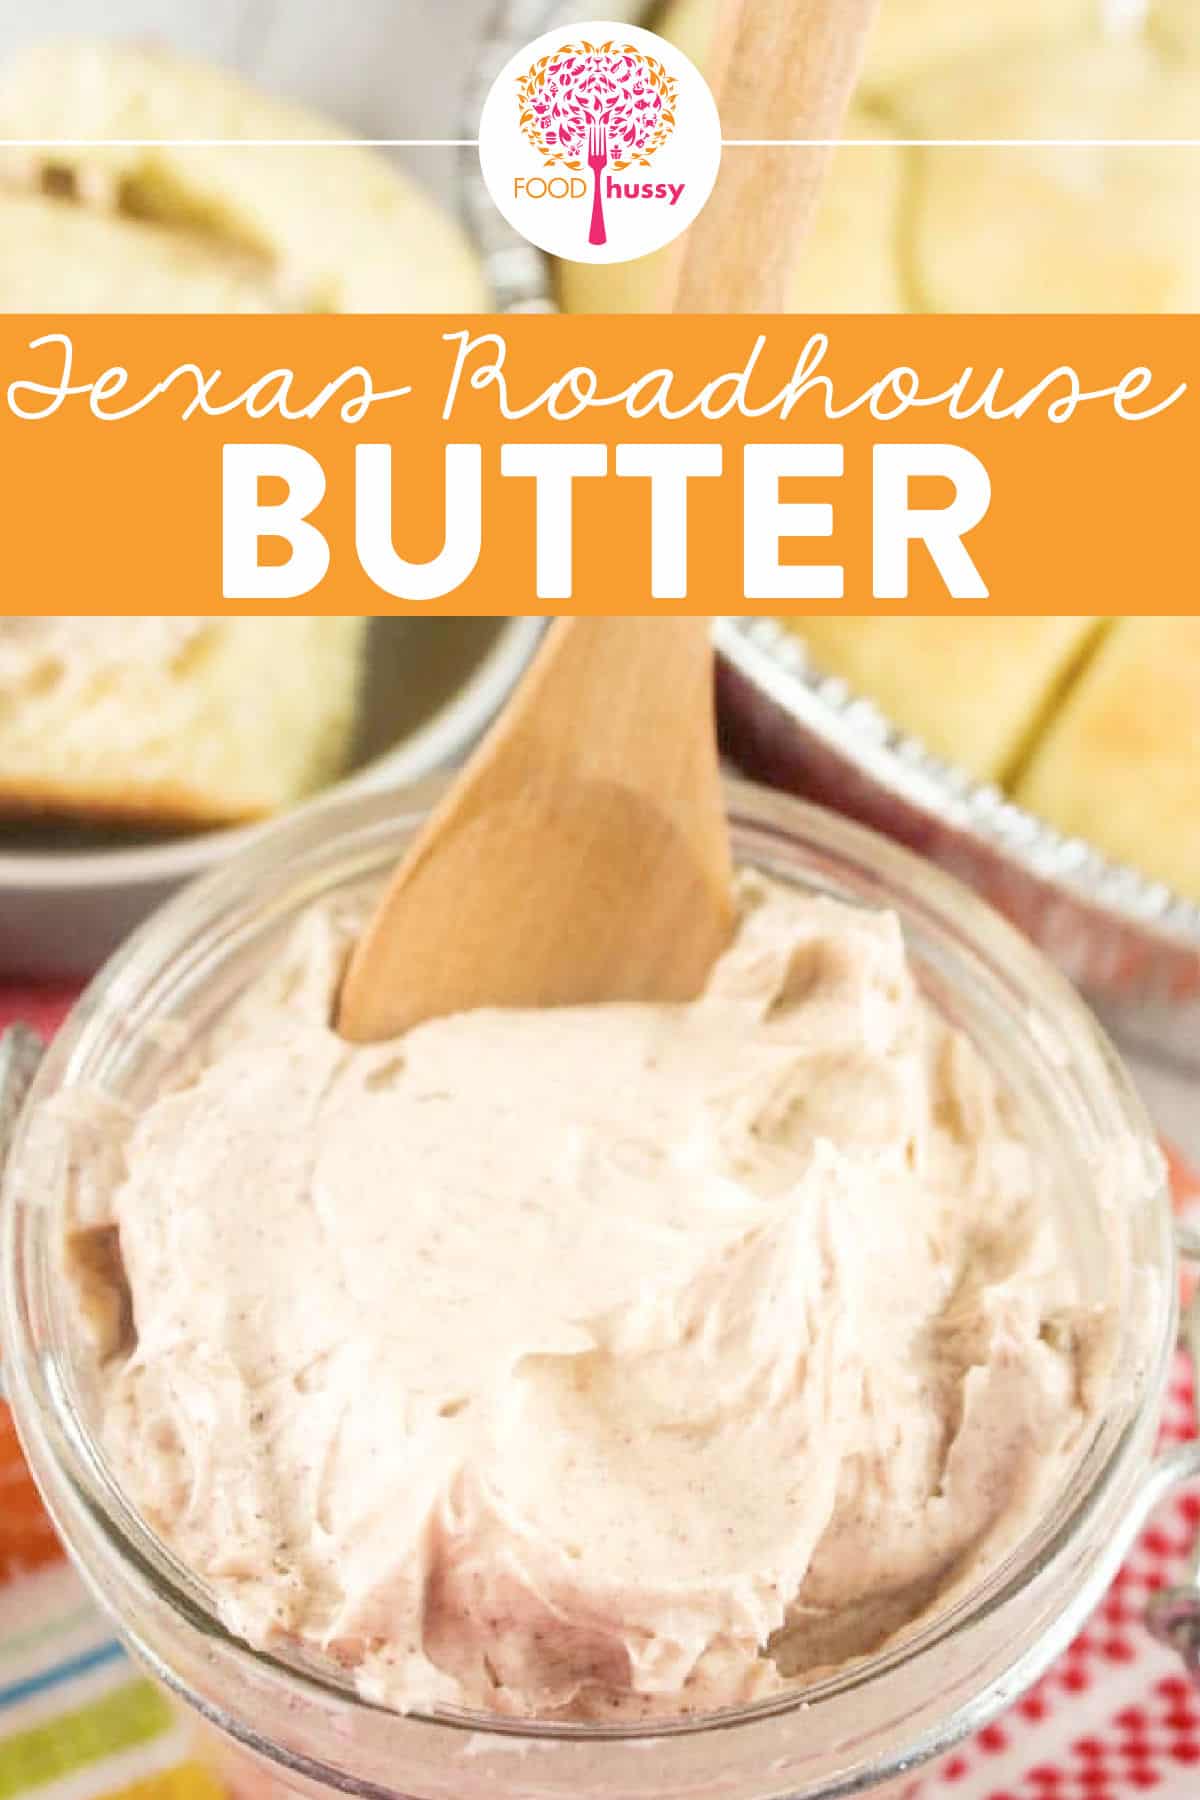 Copycat Texas Roadhouse butter is easy to make at home! If you love Texas Roadhouse bread you’re going to love this fabulous homemade copycat recipe for their sweet butter. It’s a delicious treat on your favorite bread. via @foodhussy